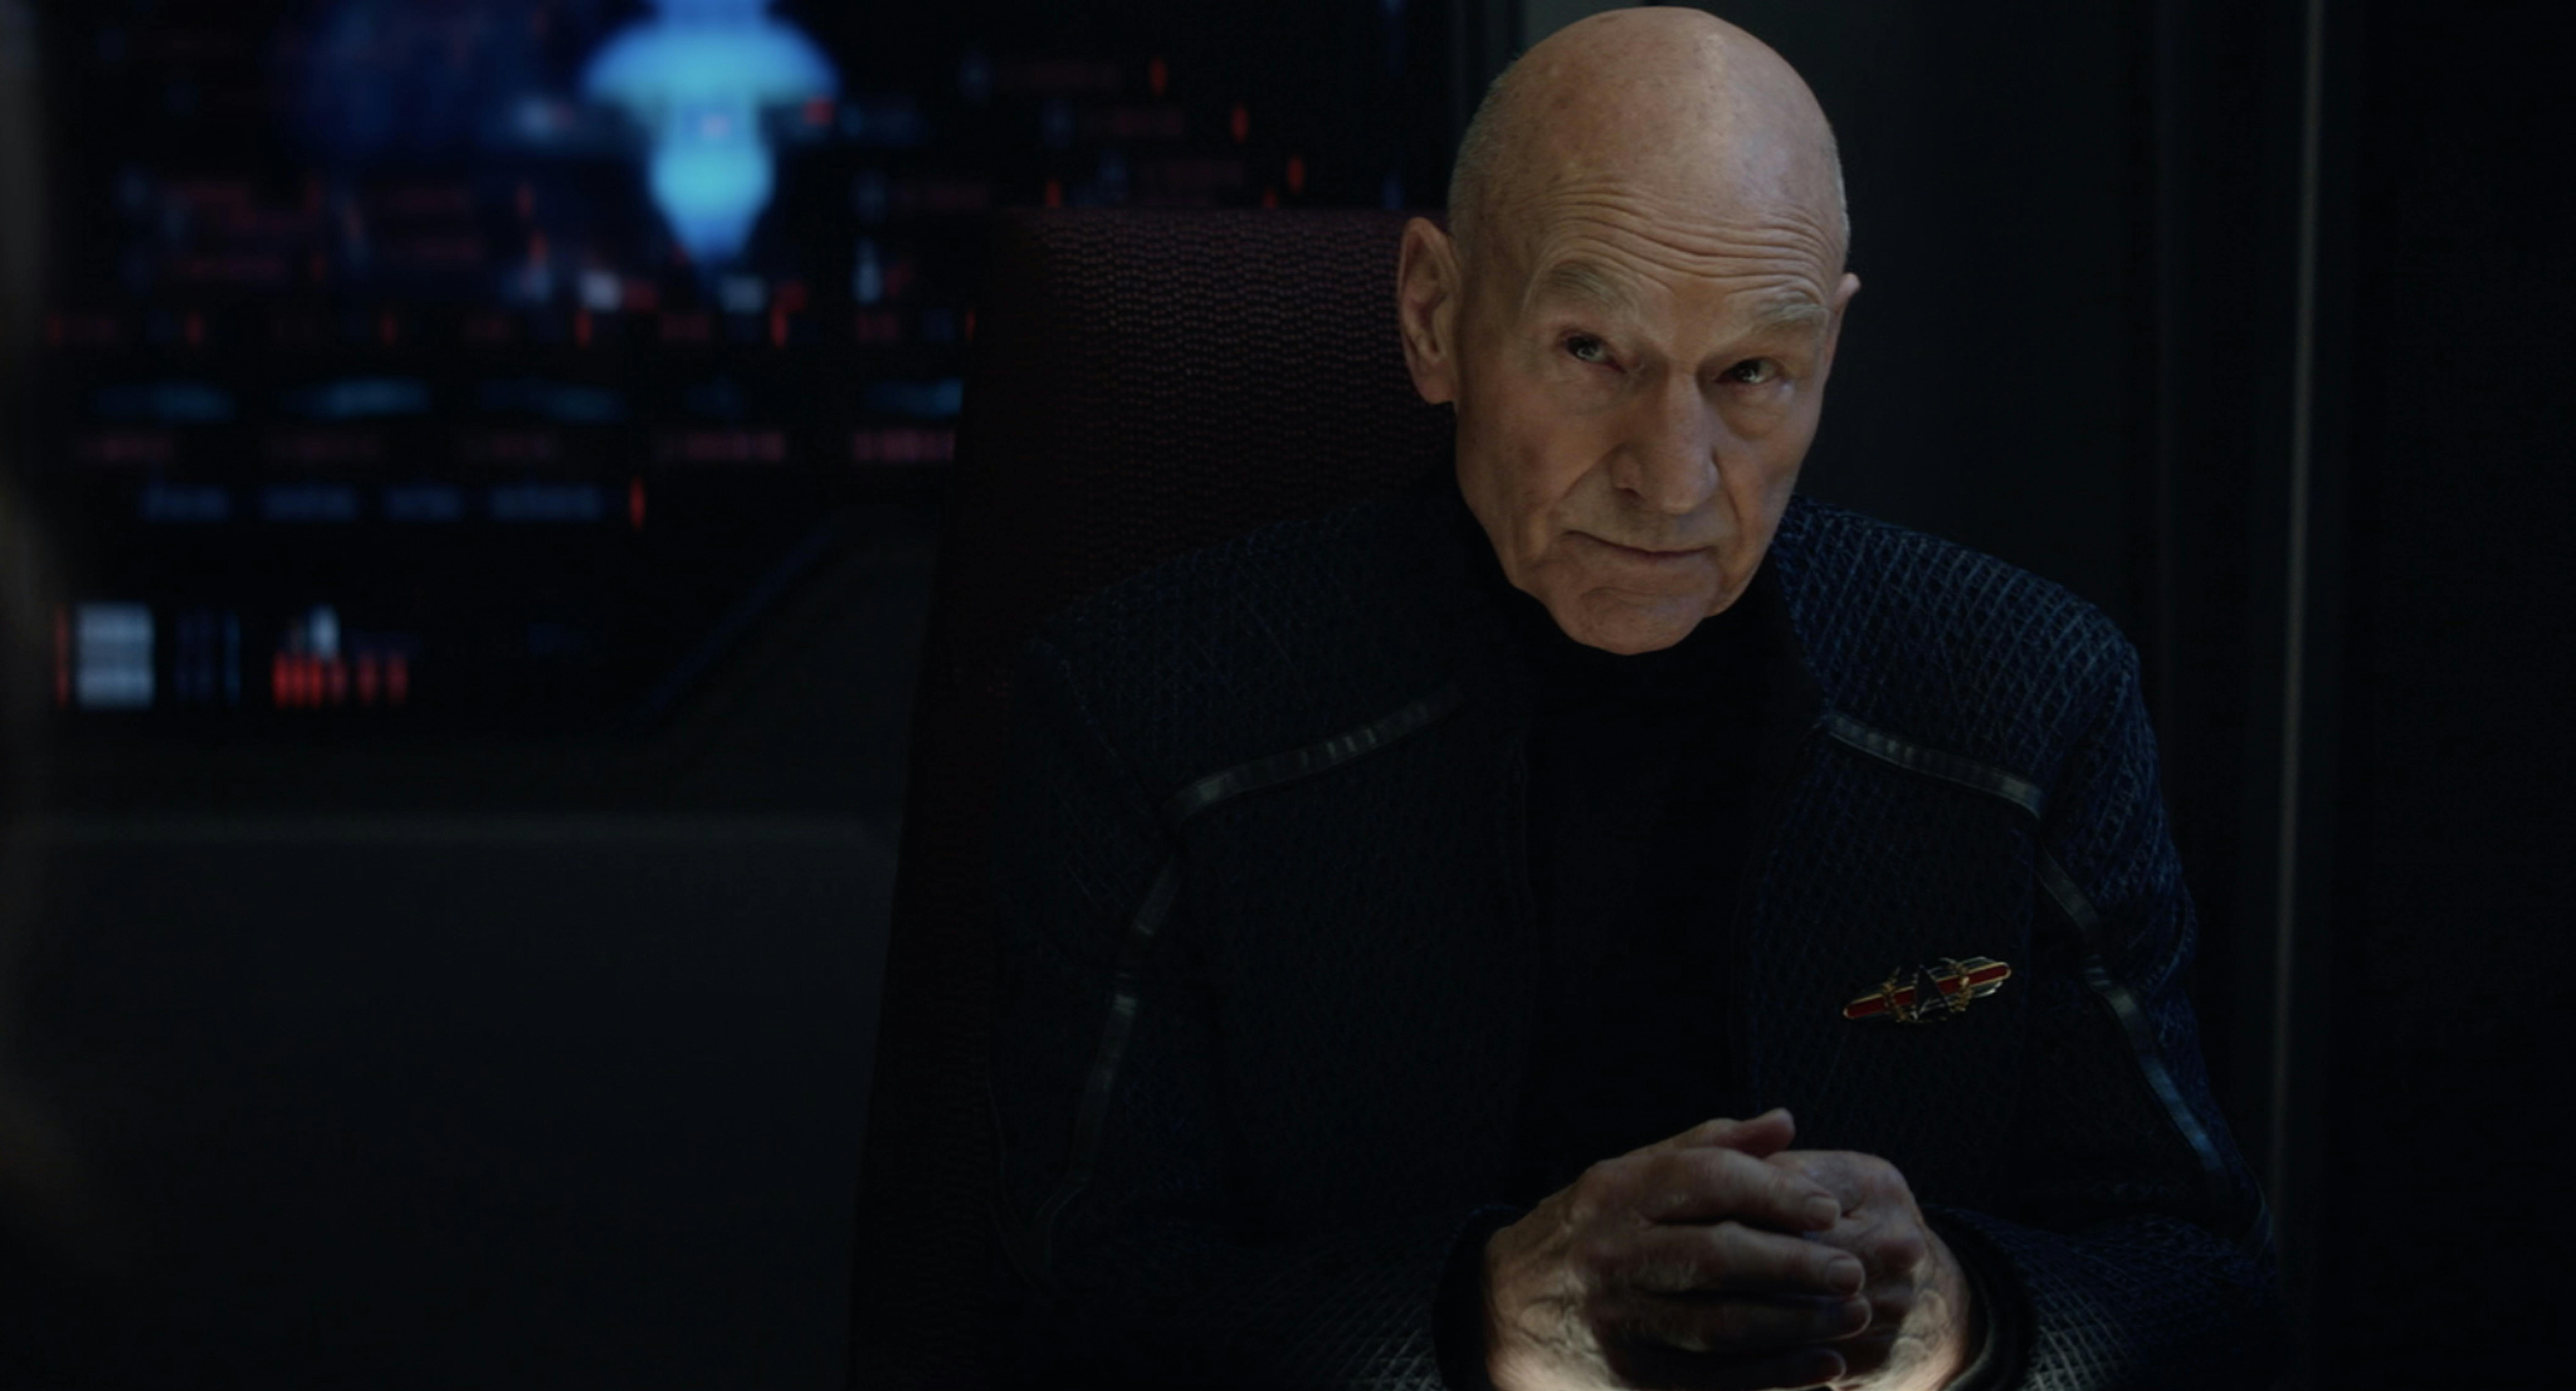 Admiral Jean-Luc Picard sits with his head tilted down but gaze looking up with his hands folded in front of him